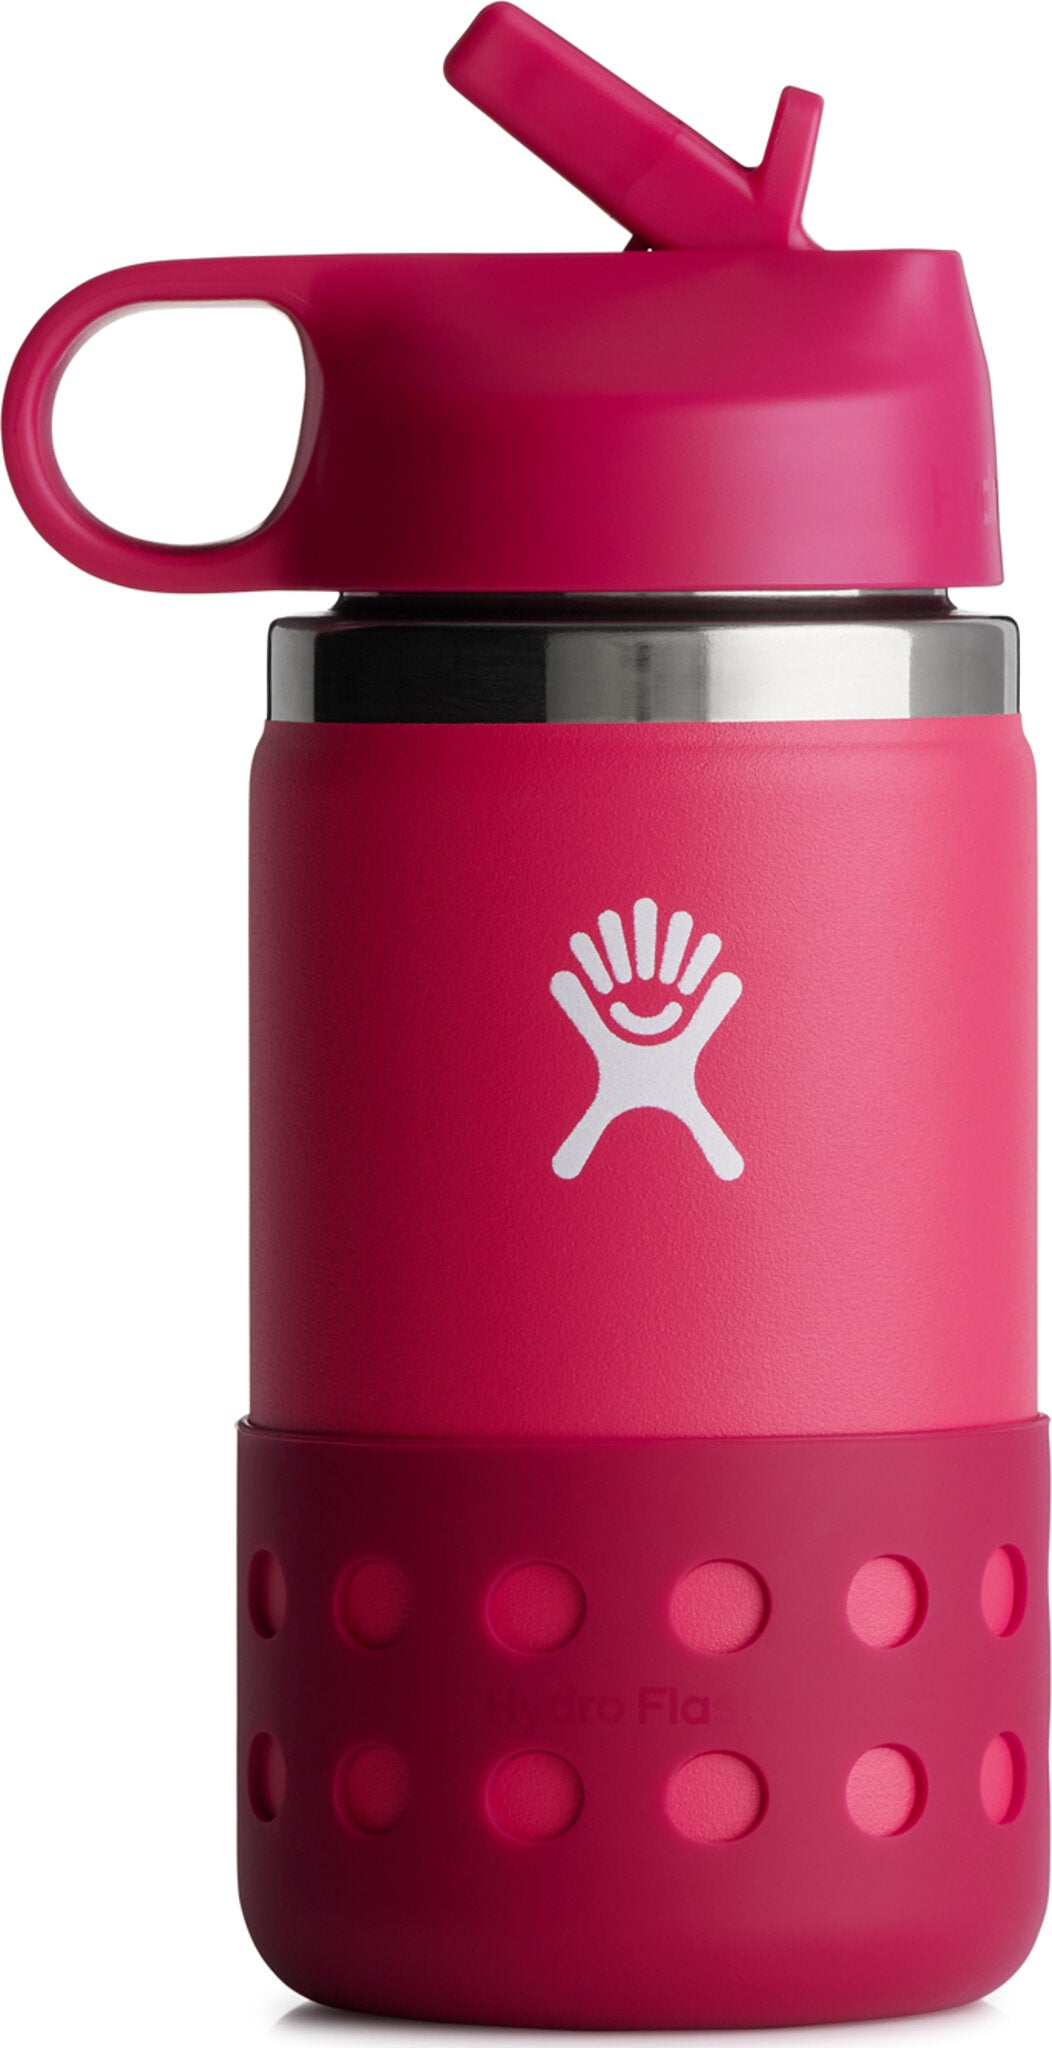 HydroFlask 12 oz Kids Wide Mouth CYCLES ET SPORTS